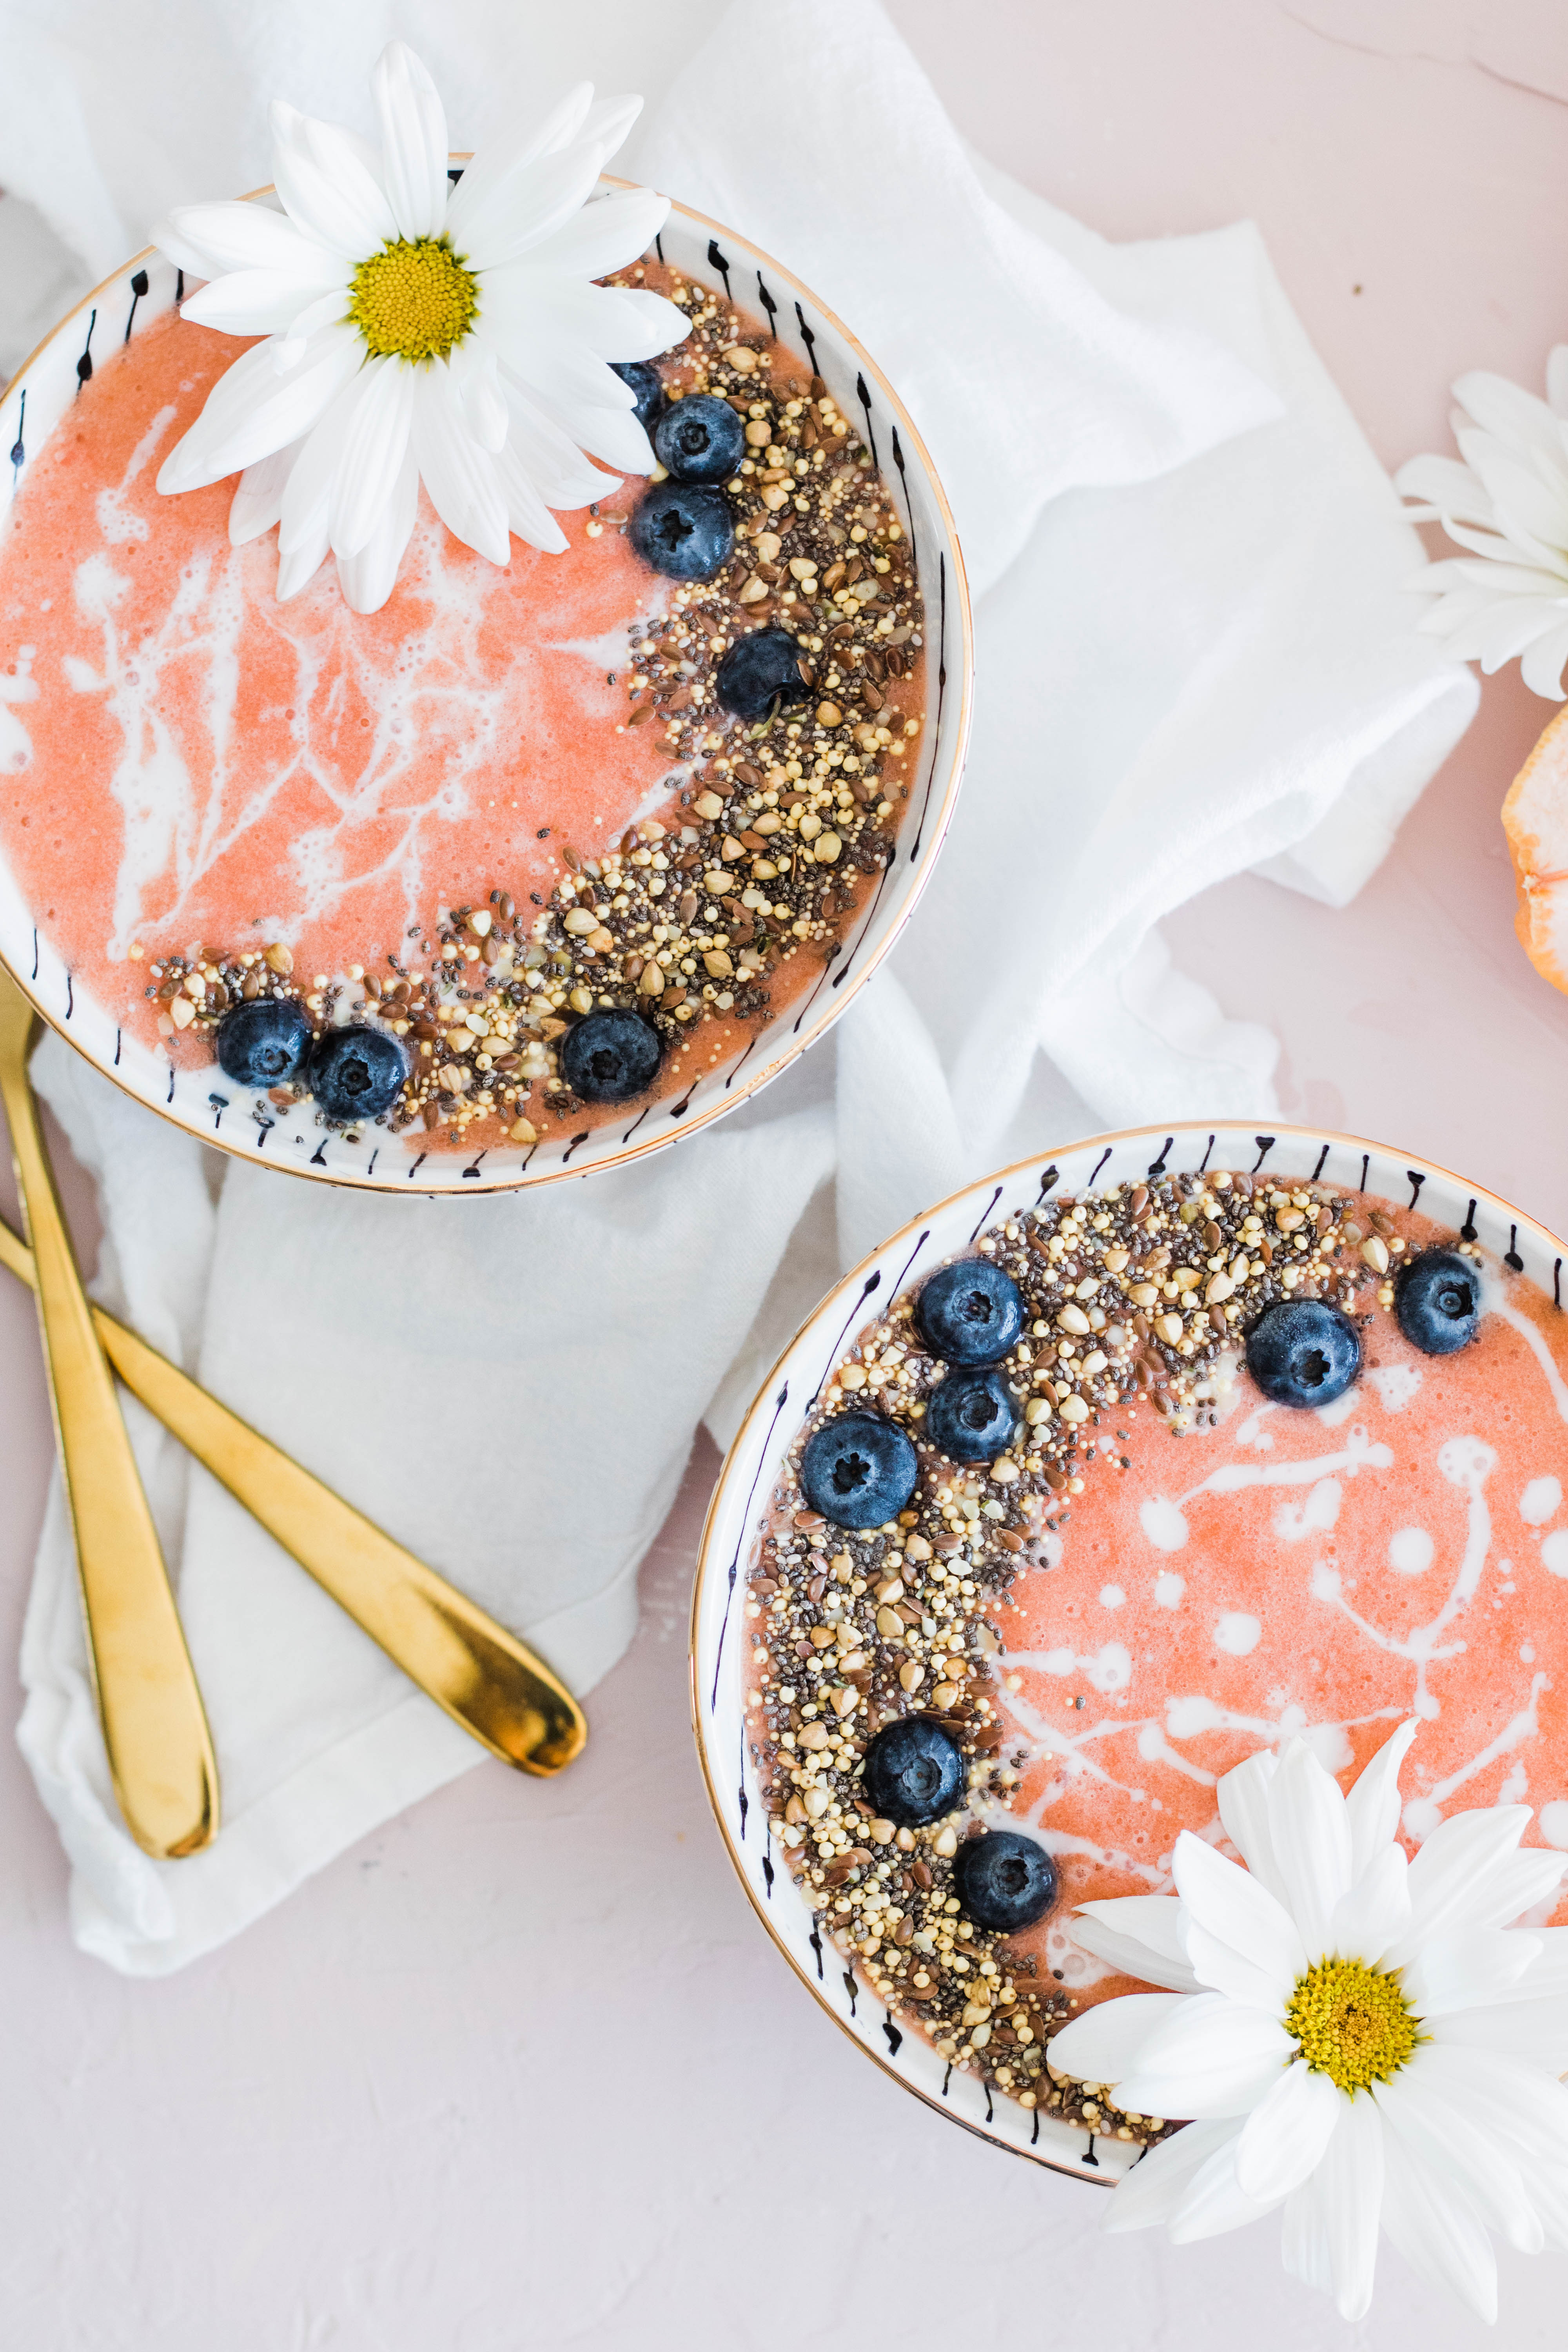 Vitamin C Booster Strawberry Citrus Pineapple Smoothie Bowl.